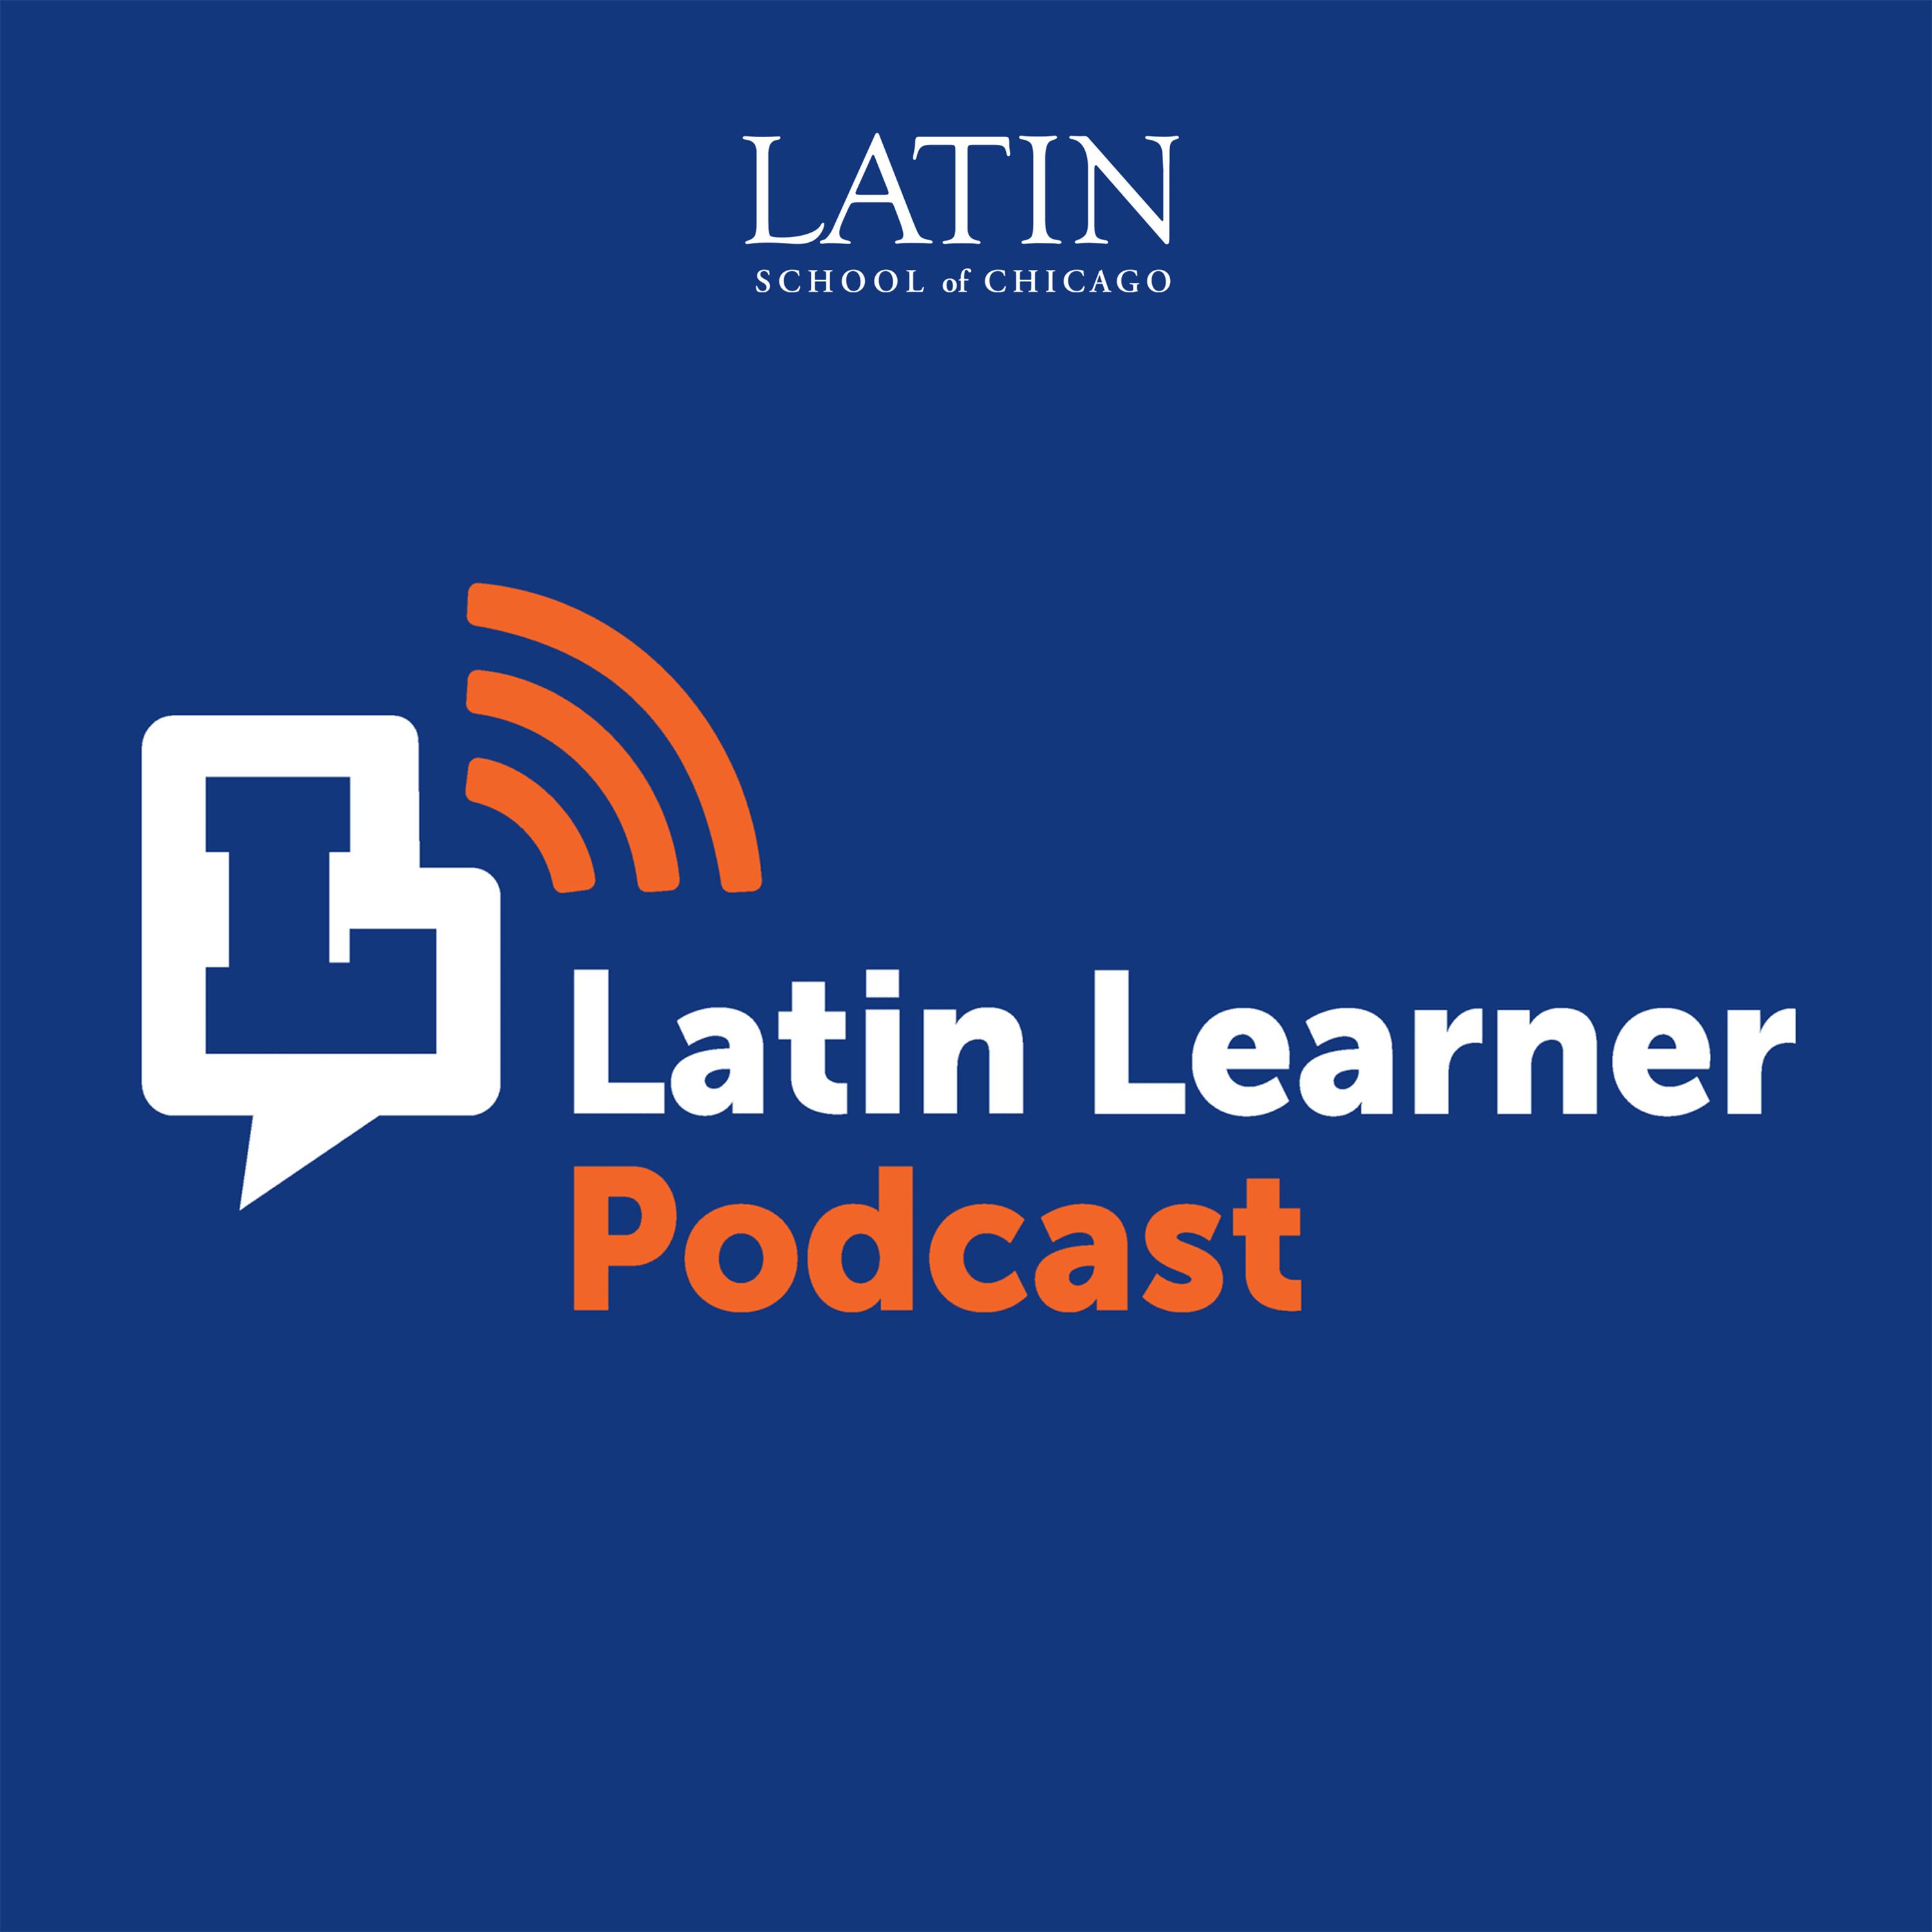 The Latin Learner Podcast